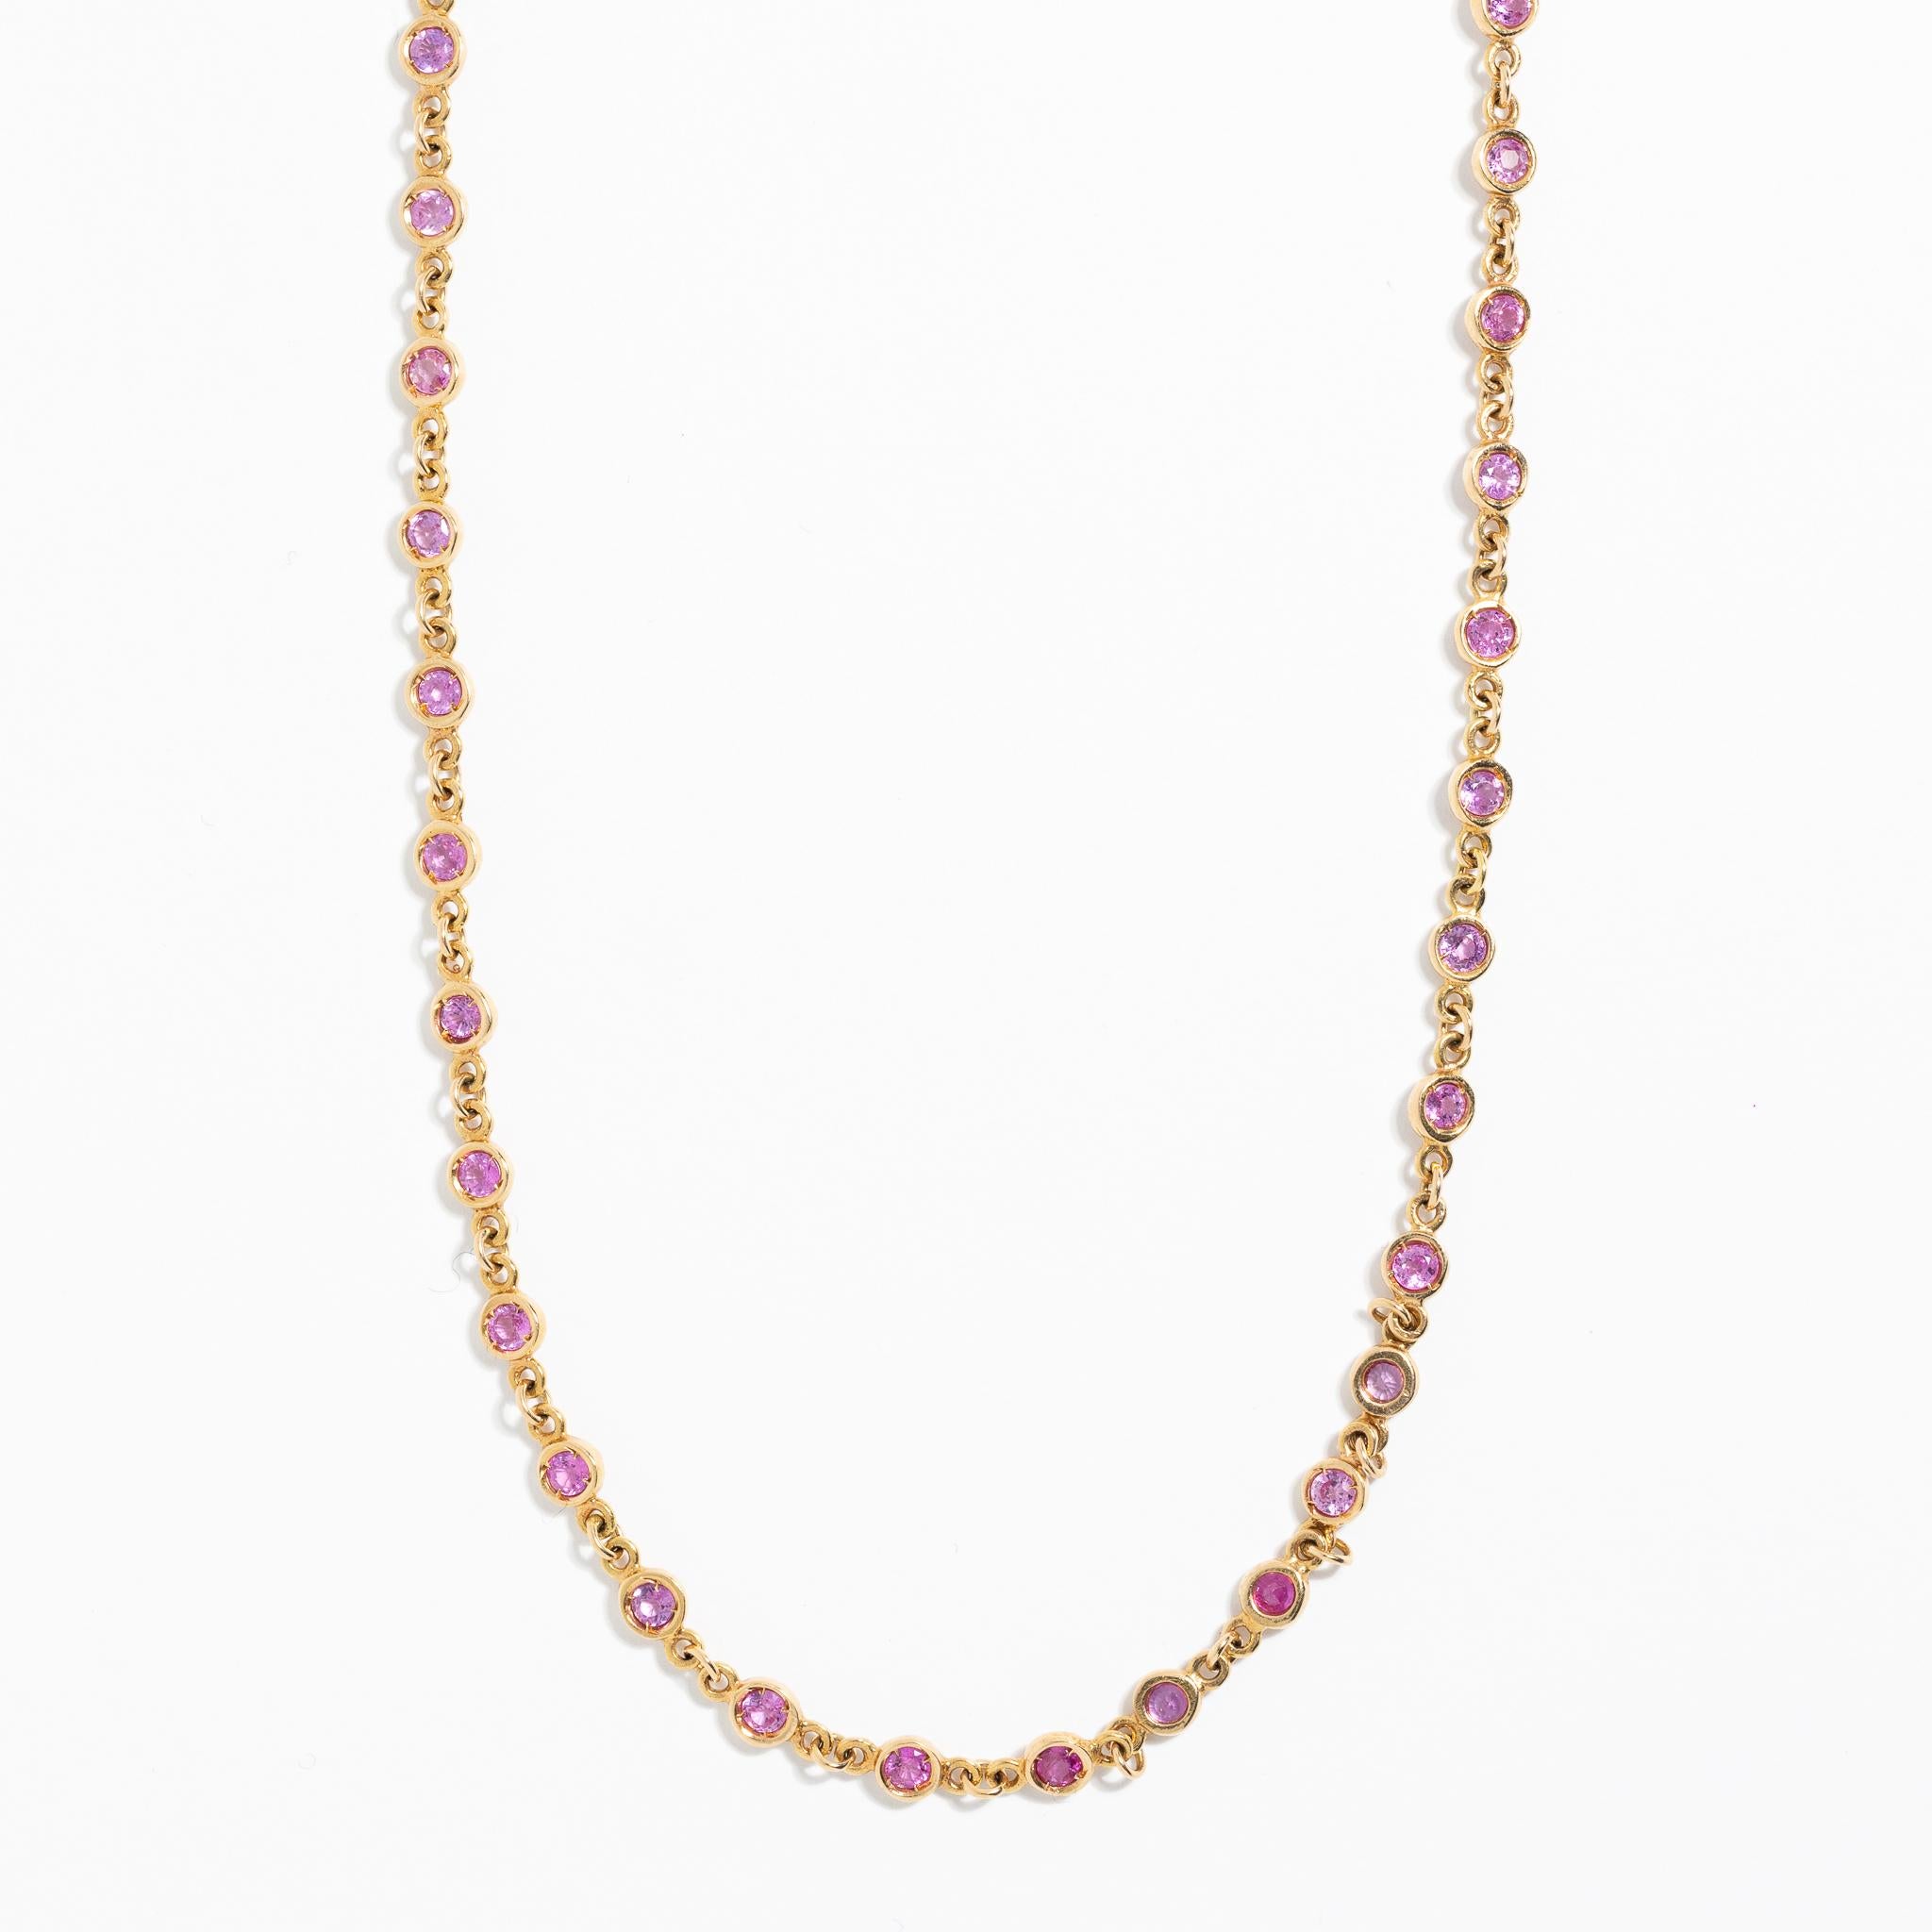 Necklace handmade in Italy of 18 kt. rose gold with round-cut pink sapphires.
This piece belongs to Fraleoni's Diamond collection.
Pink sapphires are mounted with round bezels and alternate with rose gold links.

Round-cut pink sapphires: ct.